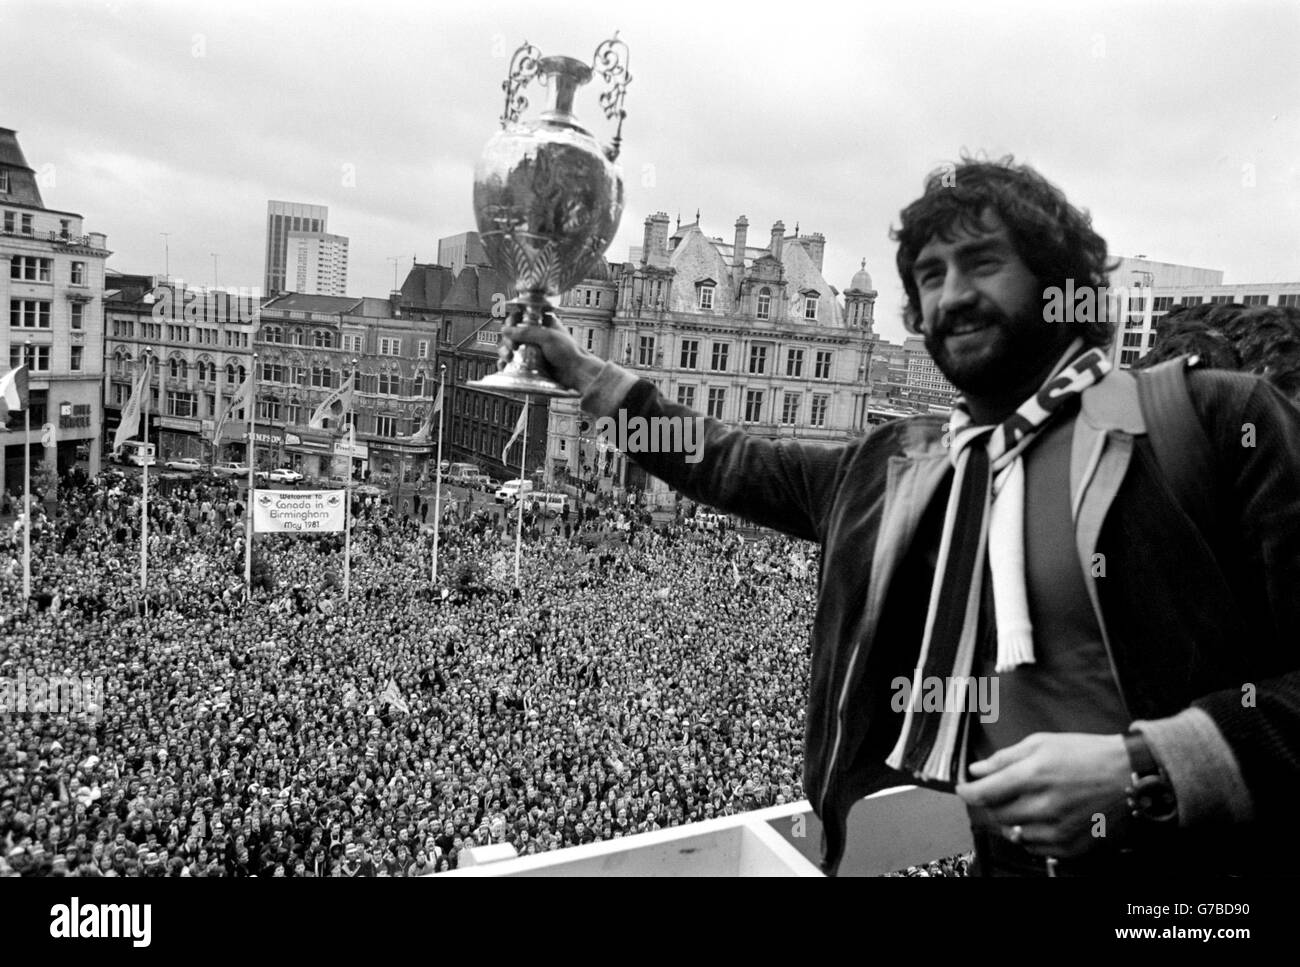 Aston Villa's captain Dennis Mortimer shows the trophy to a crowd of thousands outside the Birmingham Town Hall. Aston Villa won the league championship for the first time since 1910. Stock Photo